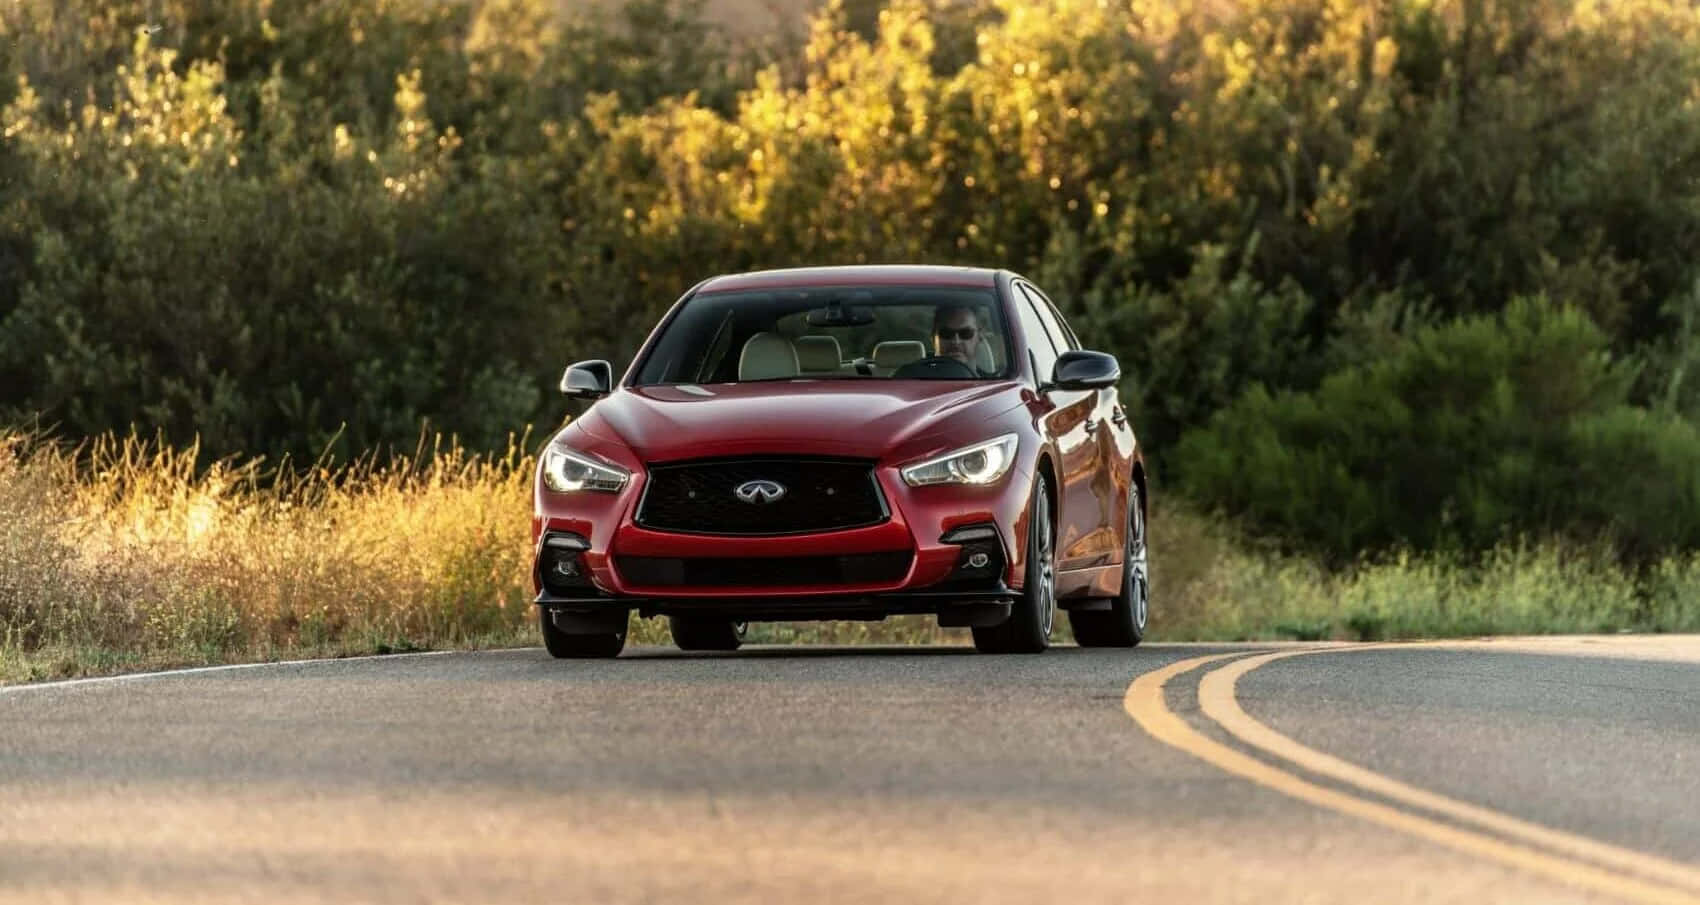 The Red 2019 Infiniti Qx50 Driving Down A Country Road Wallpaper